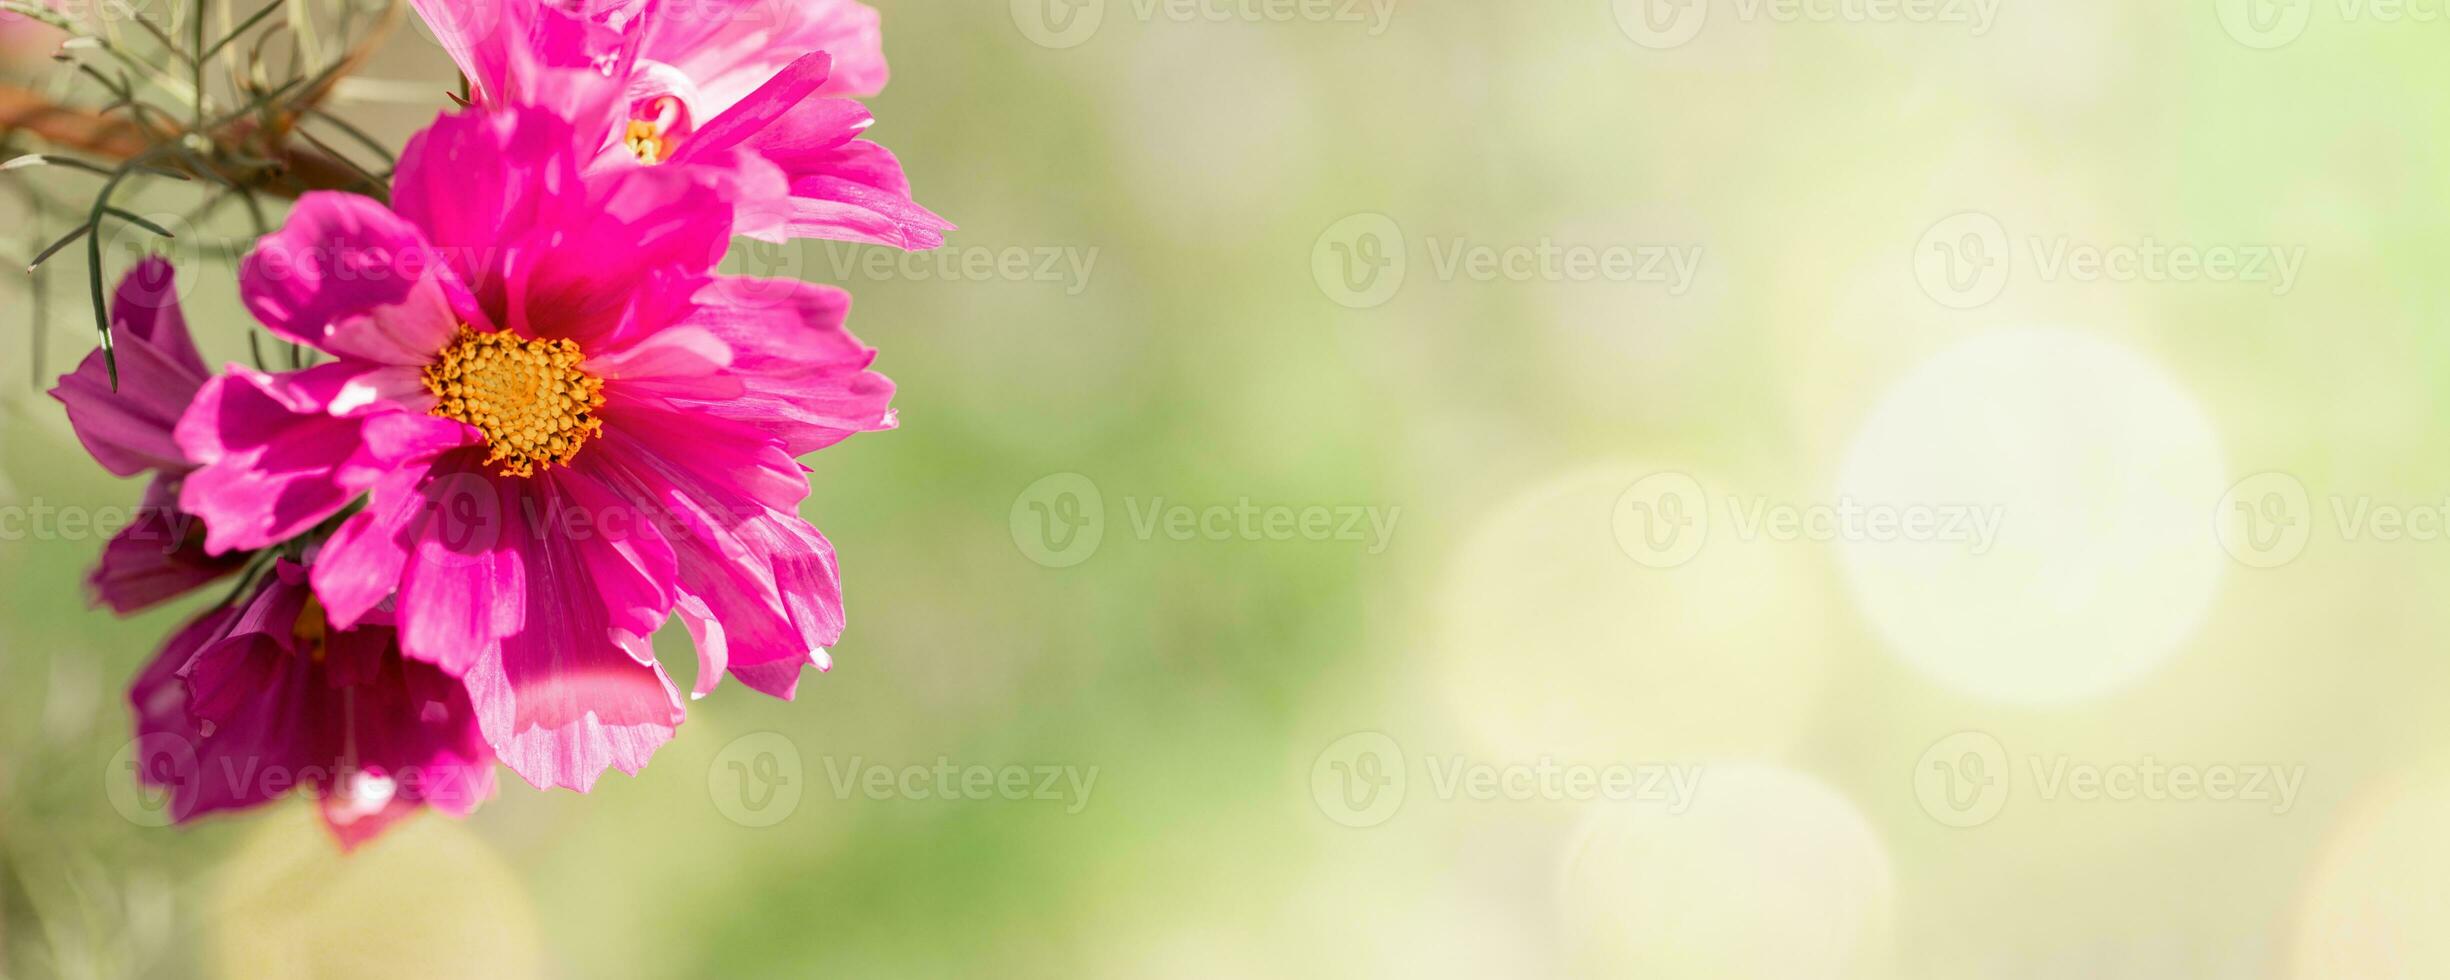 Sunlit one pink daisy or cosmea flower close up on green blurred backdrop. Floral banner. Copy space photo